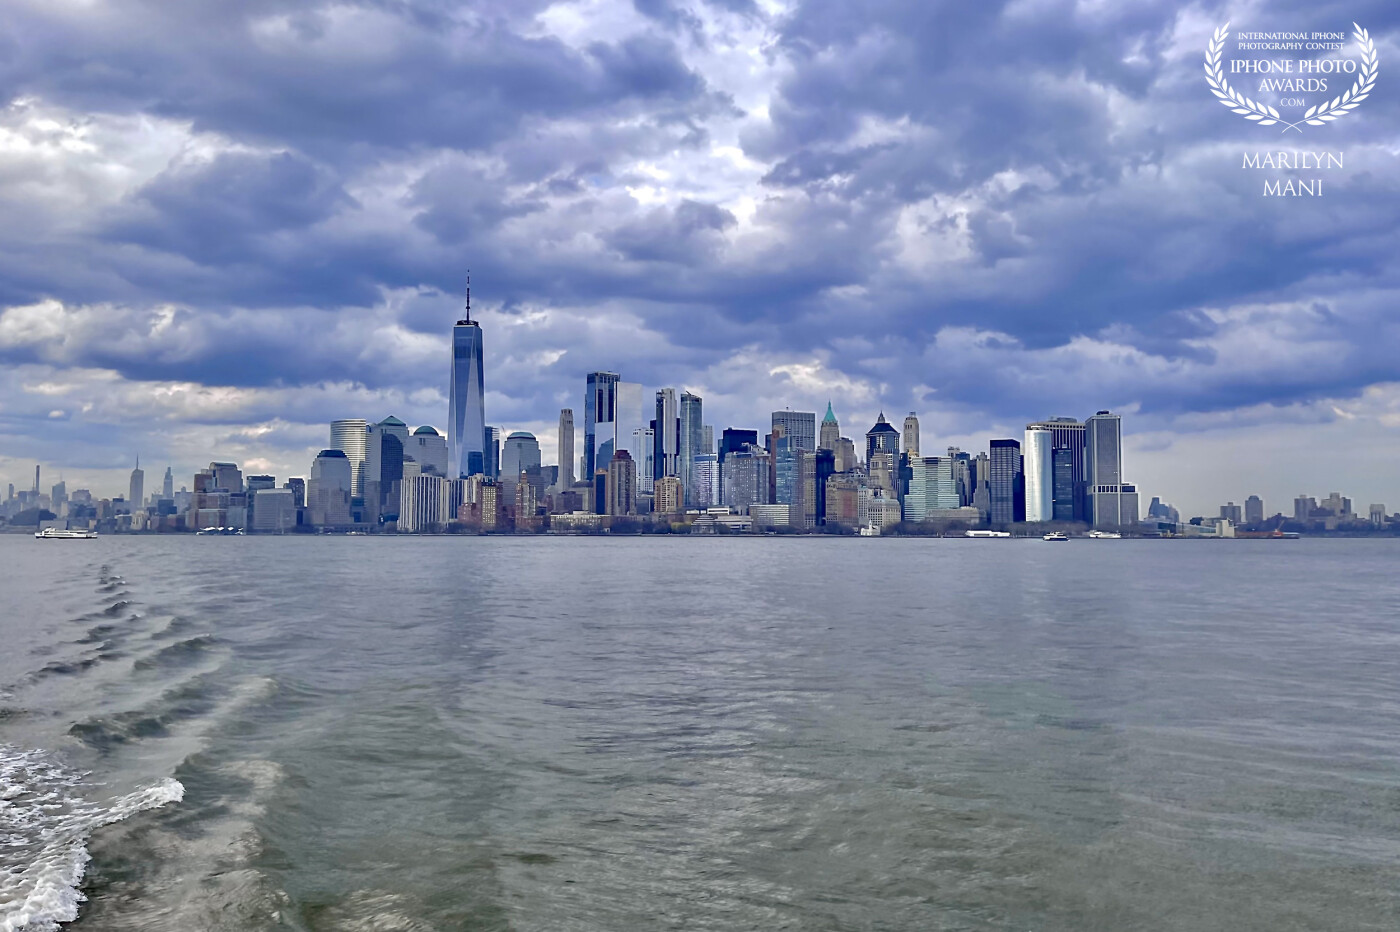 The gorgeous Manhattan skyline against a dramatic sky was a sight to behold. A cloudy chilly day can still be so beautiful!